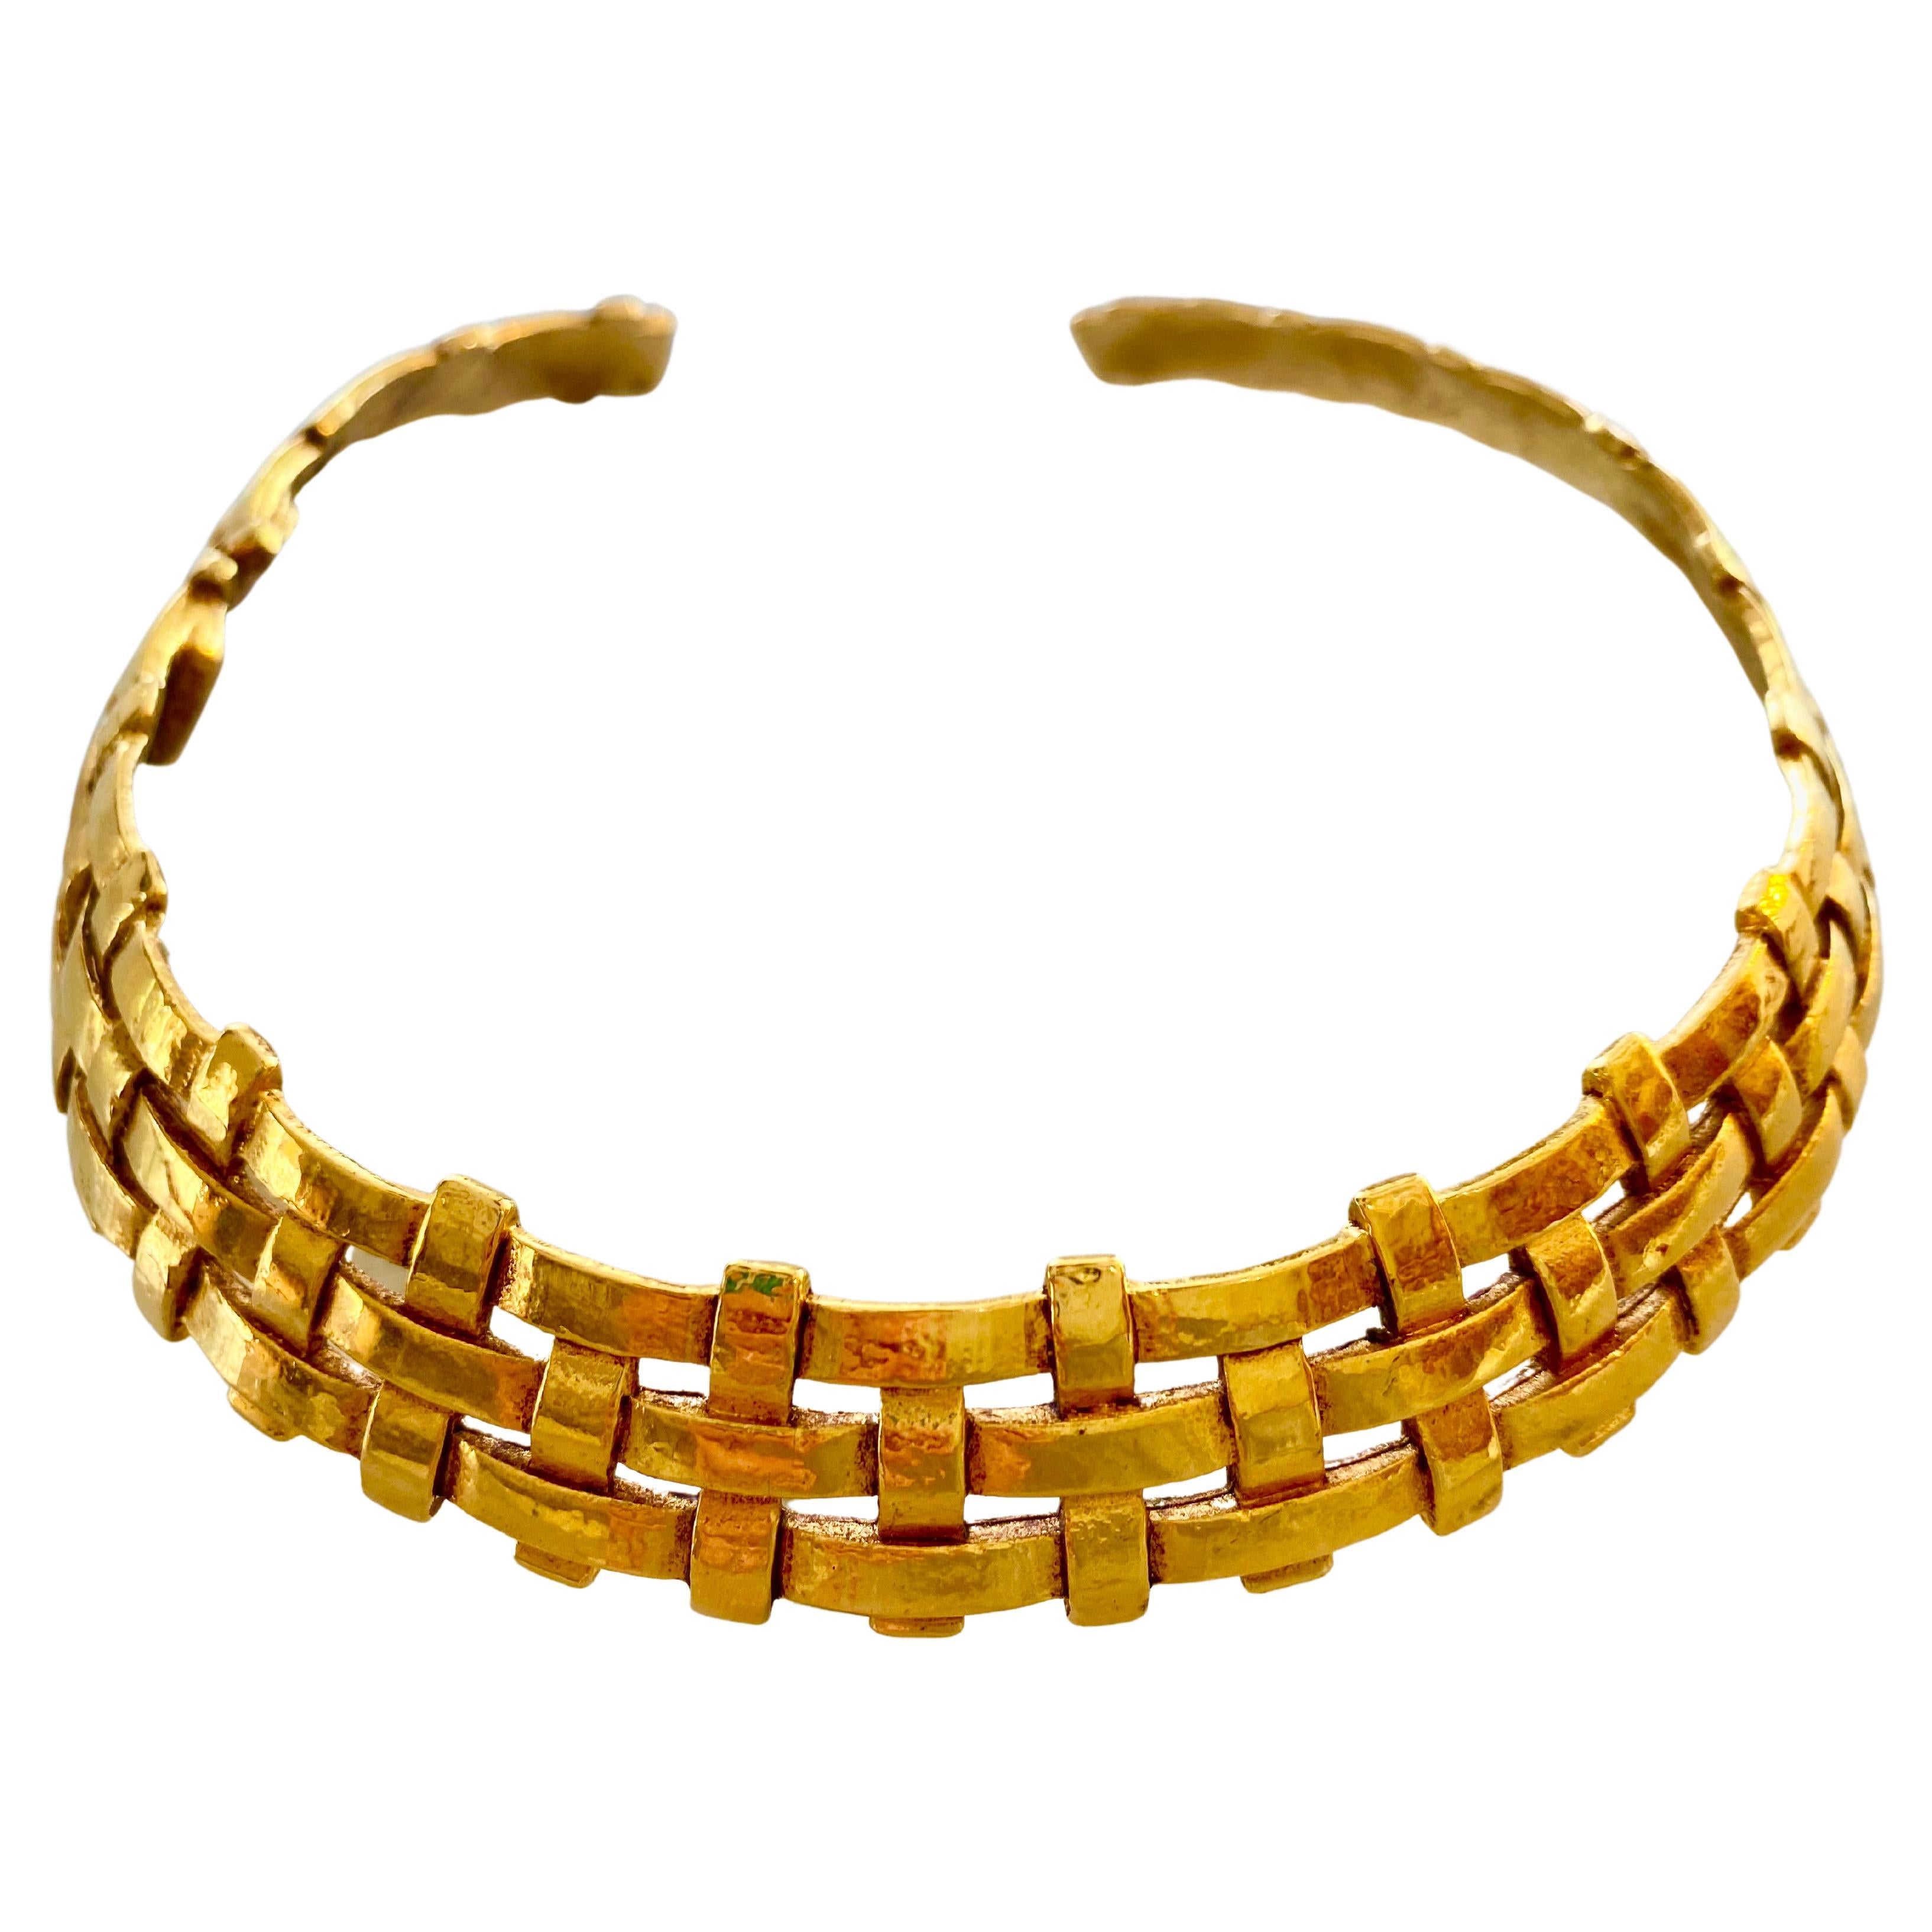 Vintage Yves Saint Laurent YSL Gold Quilted Choker Necklace, circa 1990s